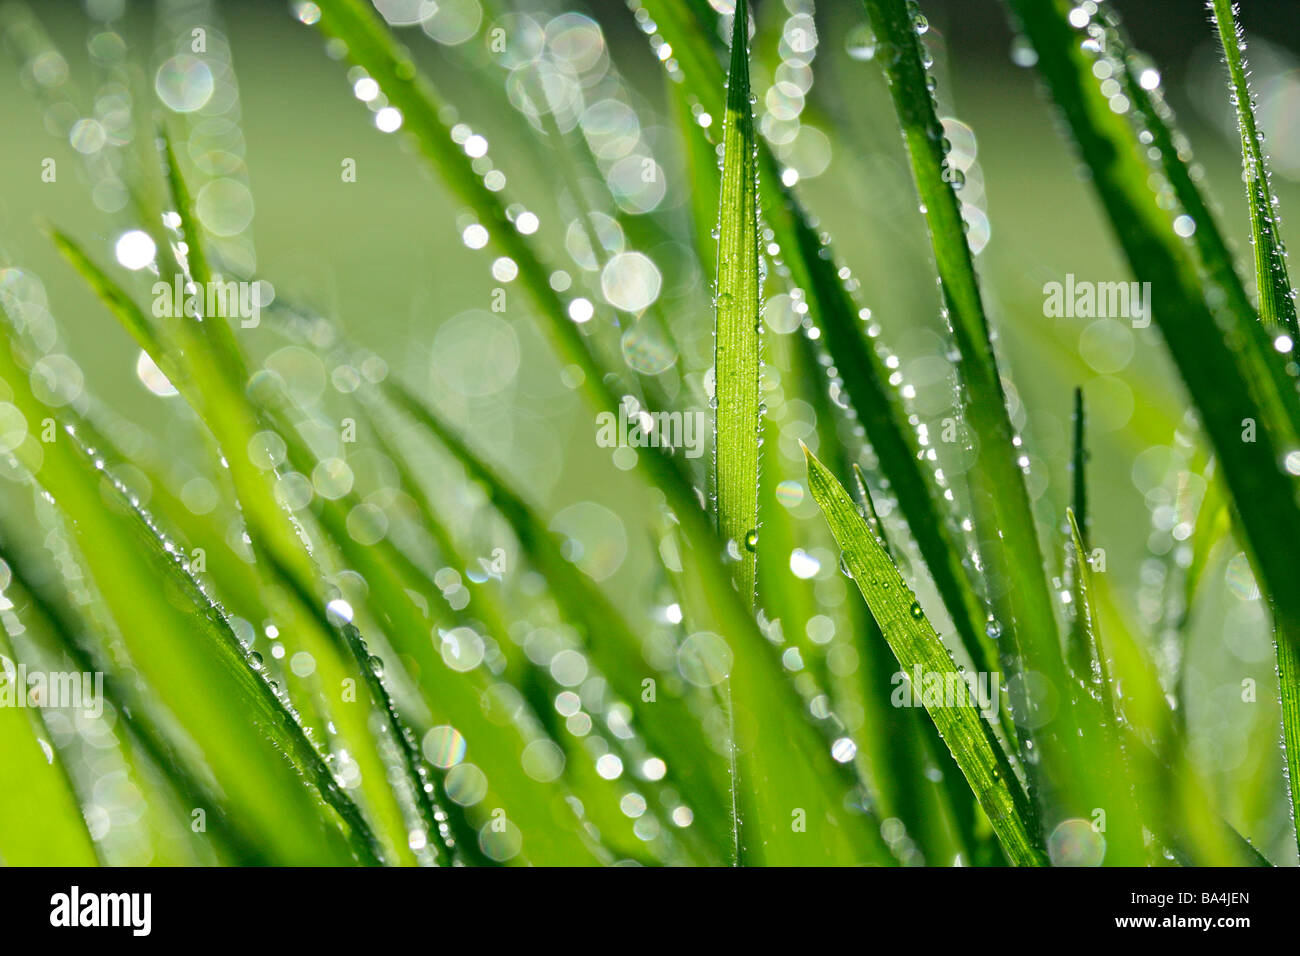 Grass and droplets Stock Photo